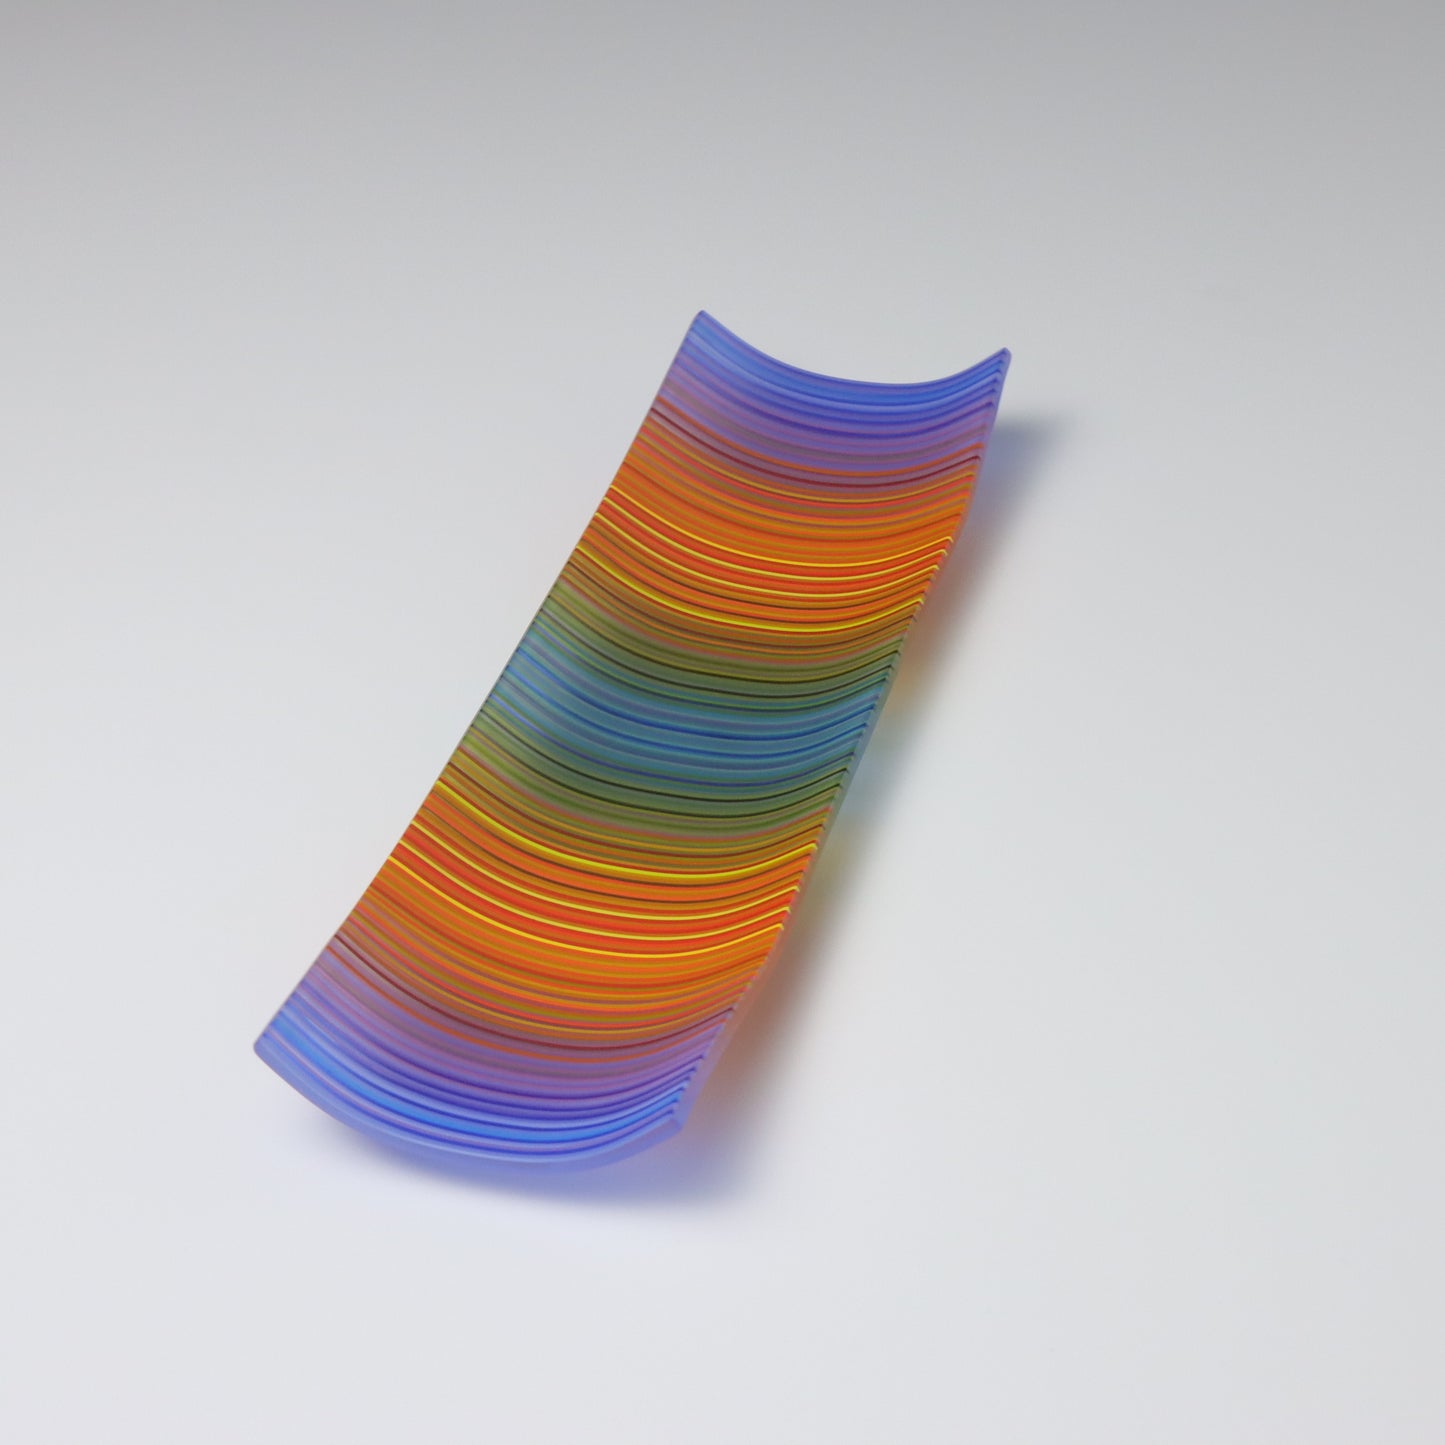 S3489 | Rectangular Shaped ColourWave Glass Plate | Blue, Orange and Teal